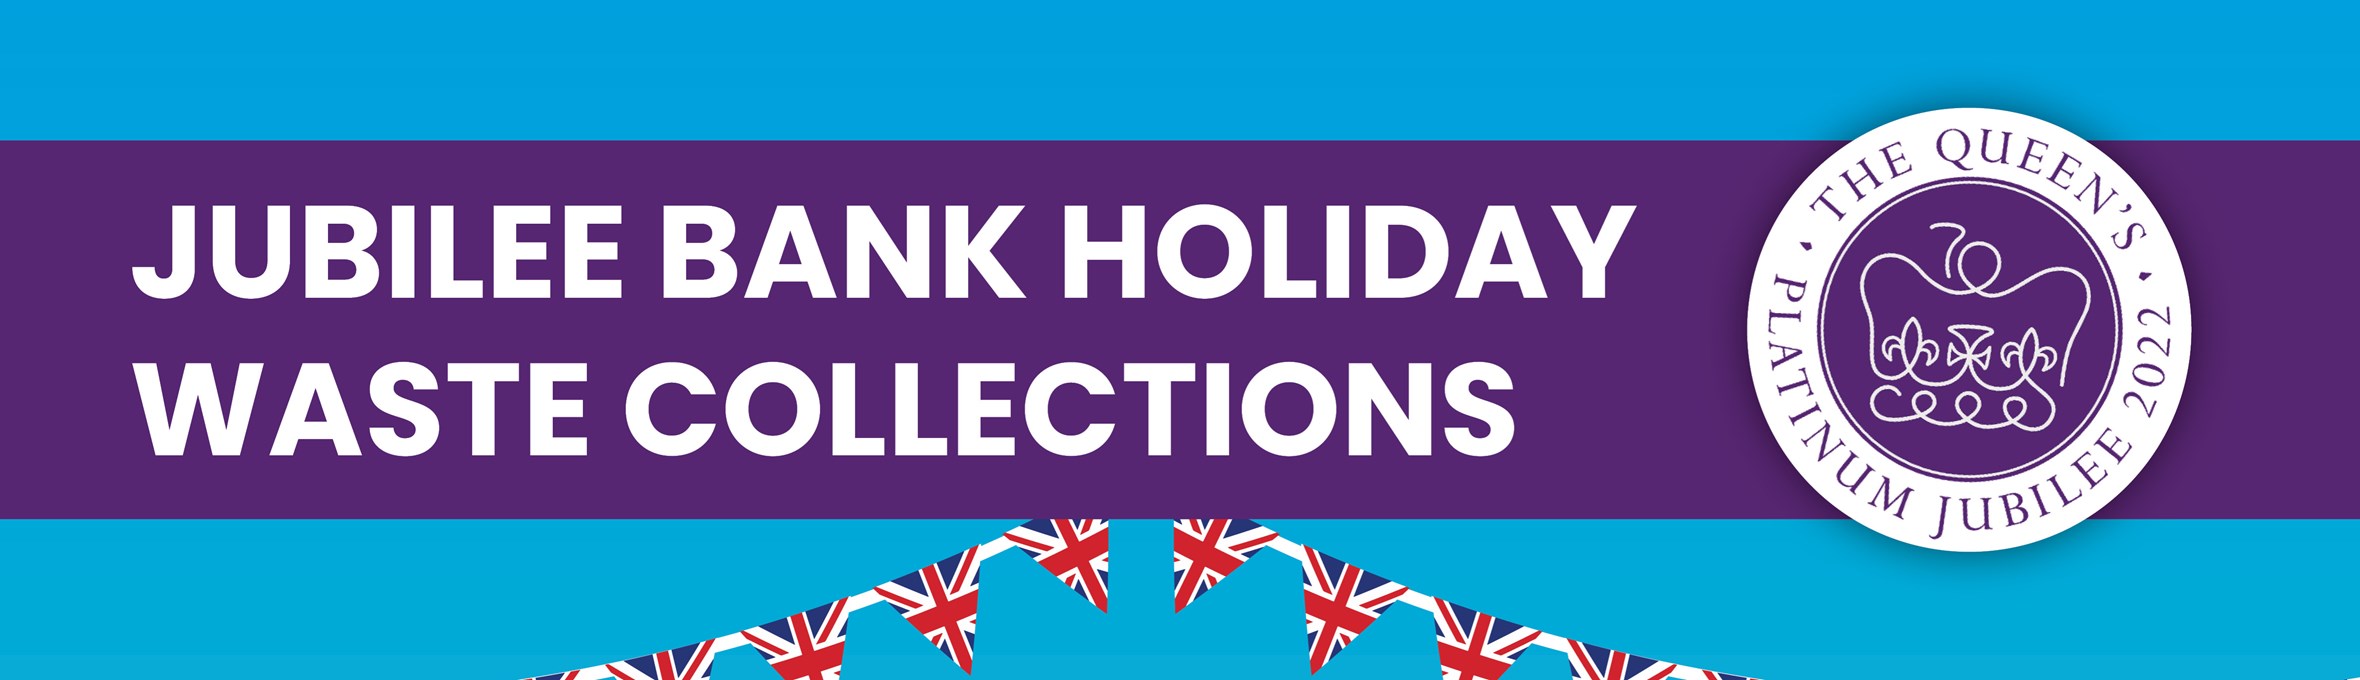 Jubilee bank holiday waste collections 